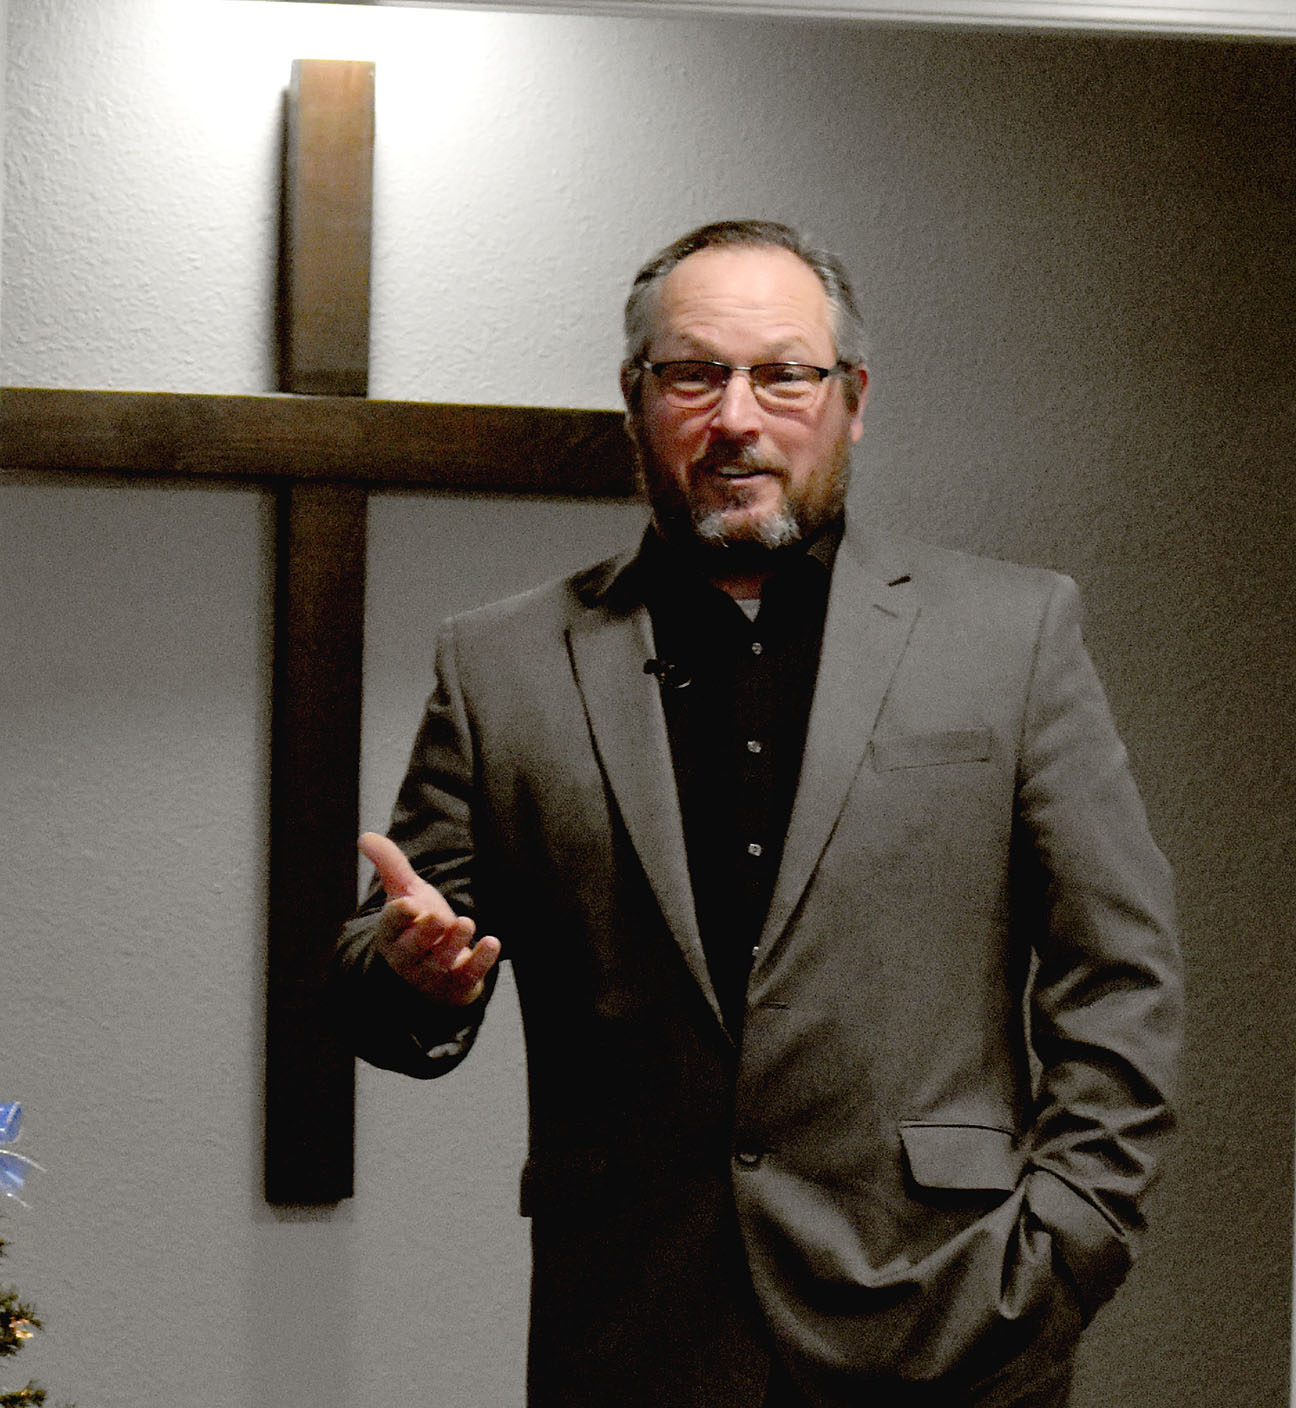 Pastor stands firm in faith despite church closing